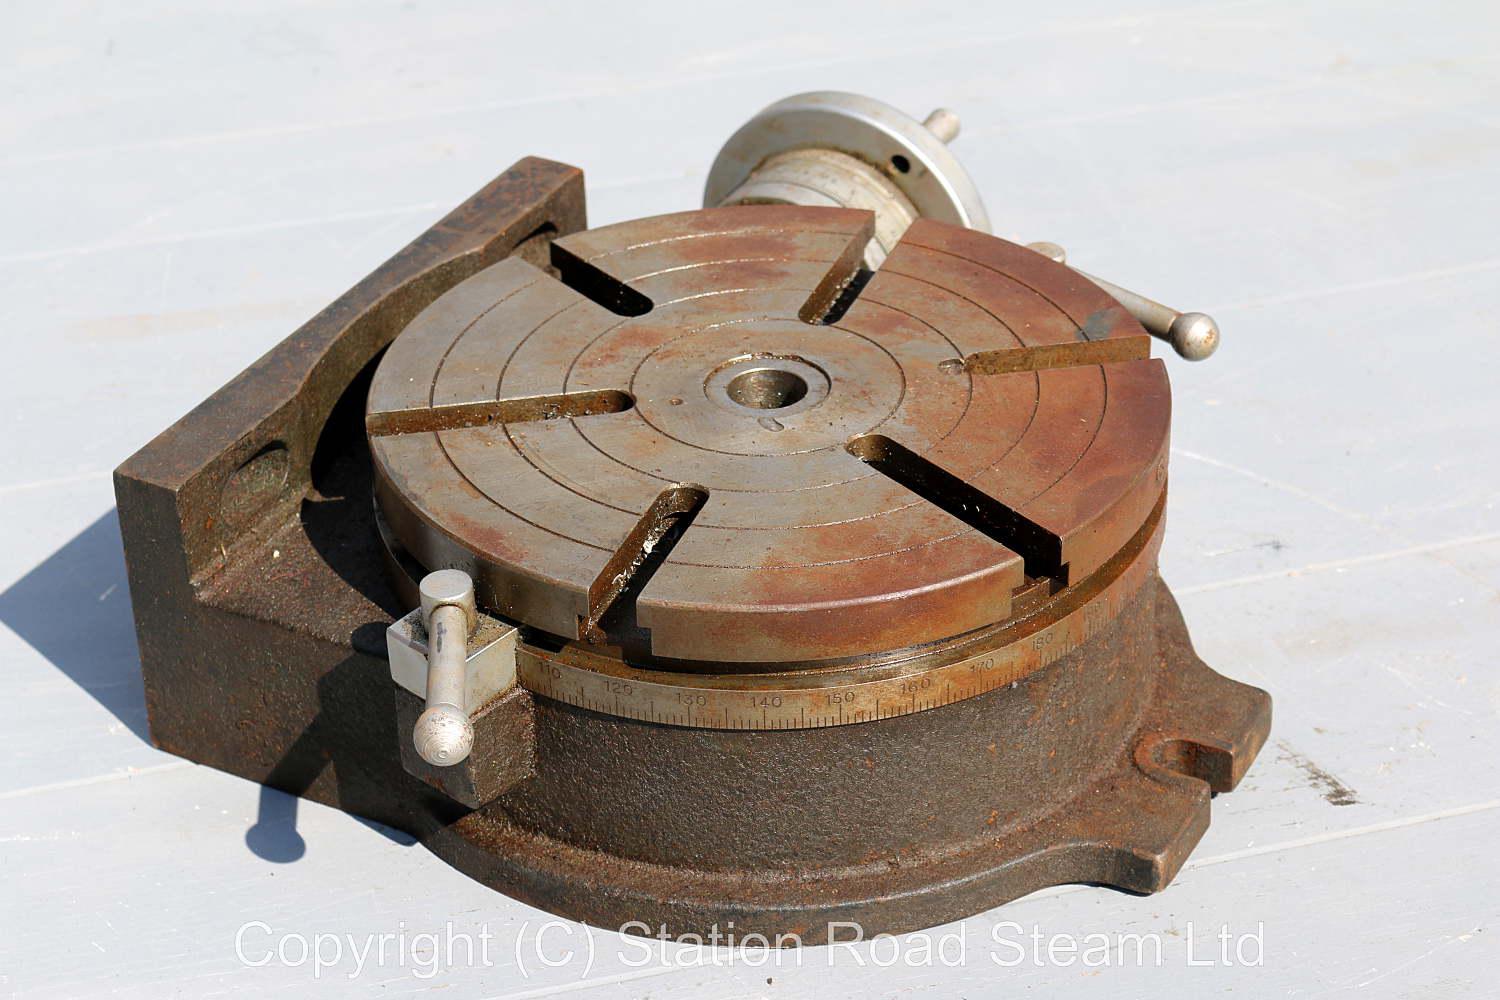 Criterion 10 inch diameter rotary table